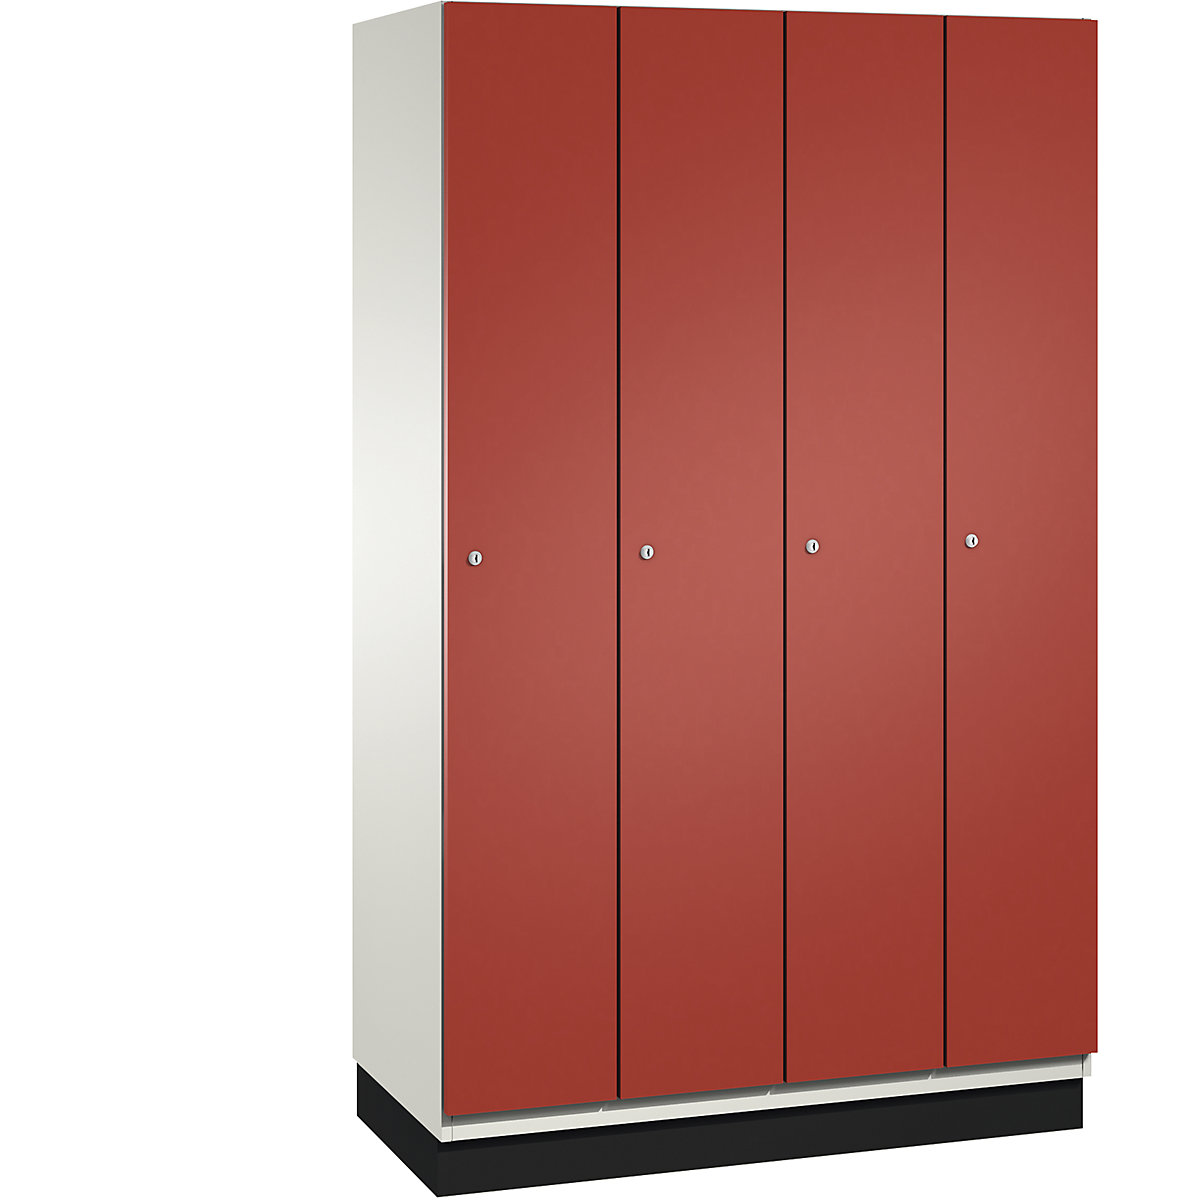 CAMBIO cloakroom locker with sheet steel doors – C+P, 4 compartments, 1200 mm wide, body pure white / door flame red-7